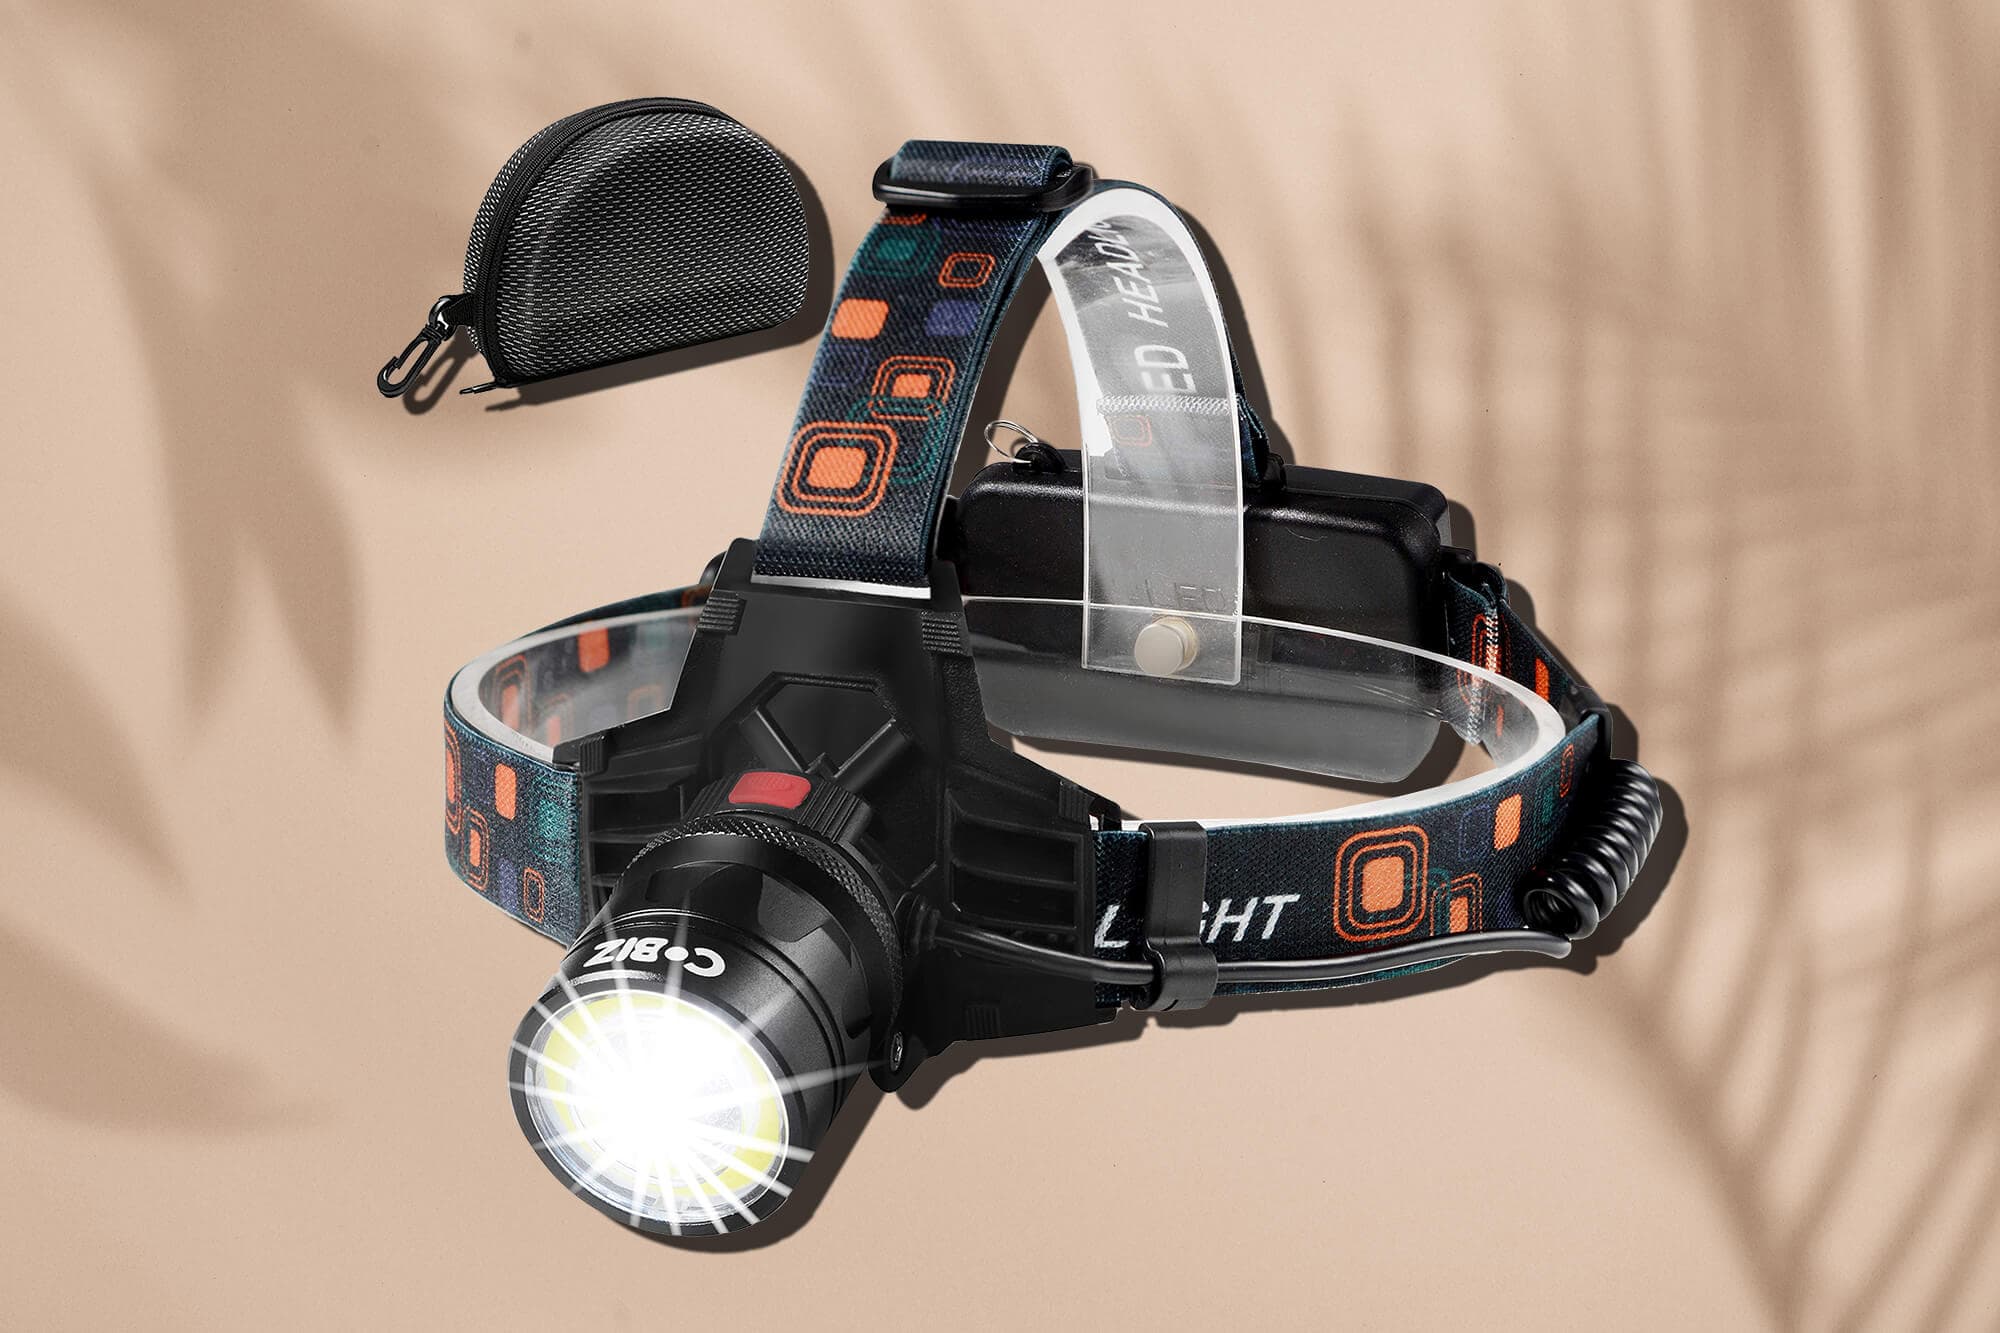 Does The Cobiz Headlamp Live Up To The Hype?